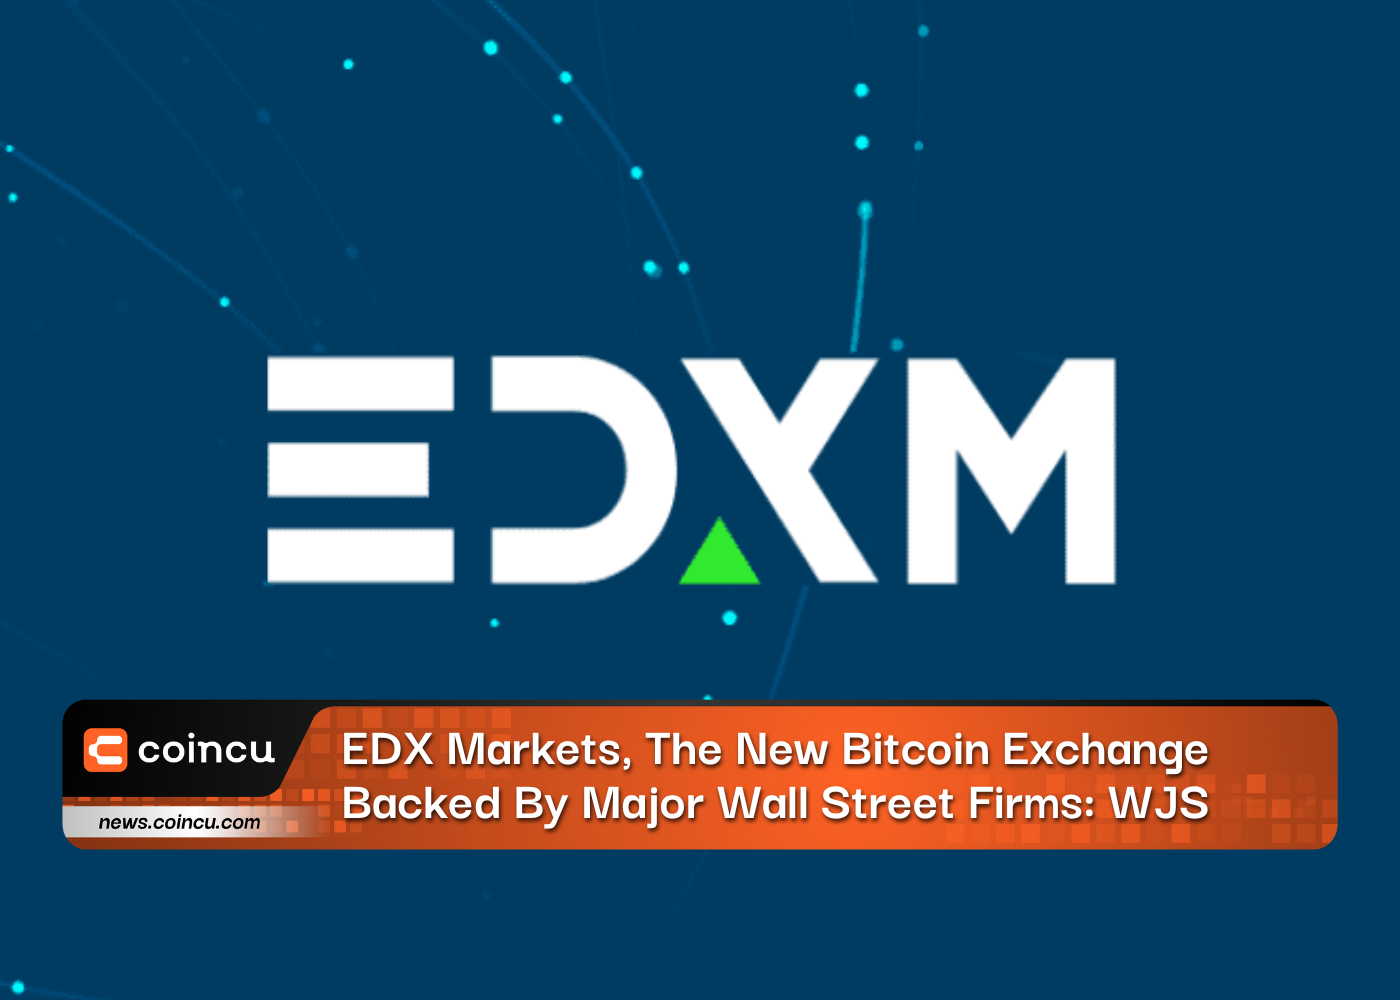 EDX Markets, The New Bitcoin Exchange Backed By Major Wall Street Firms: WJS